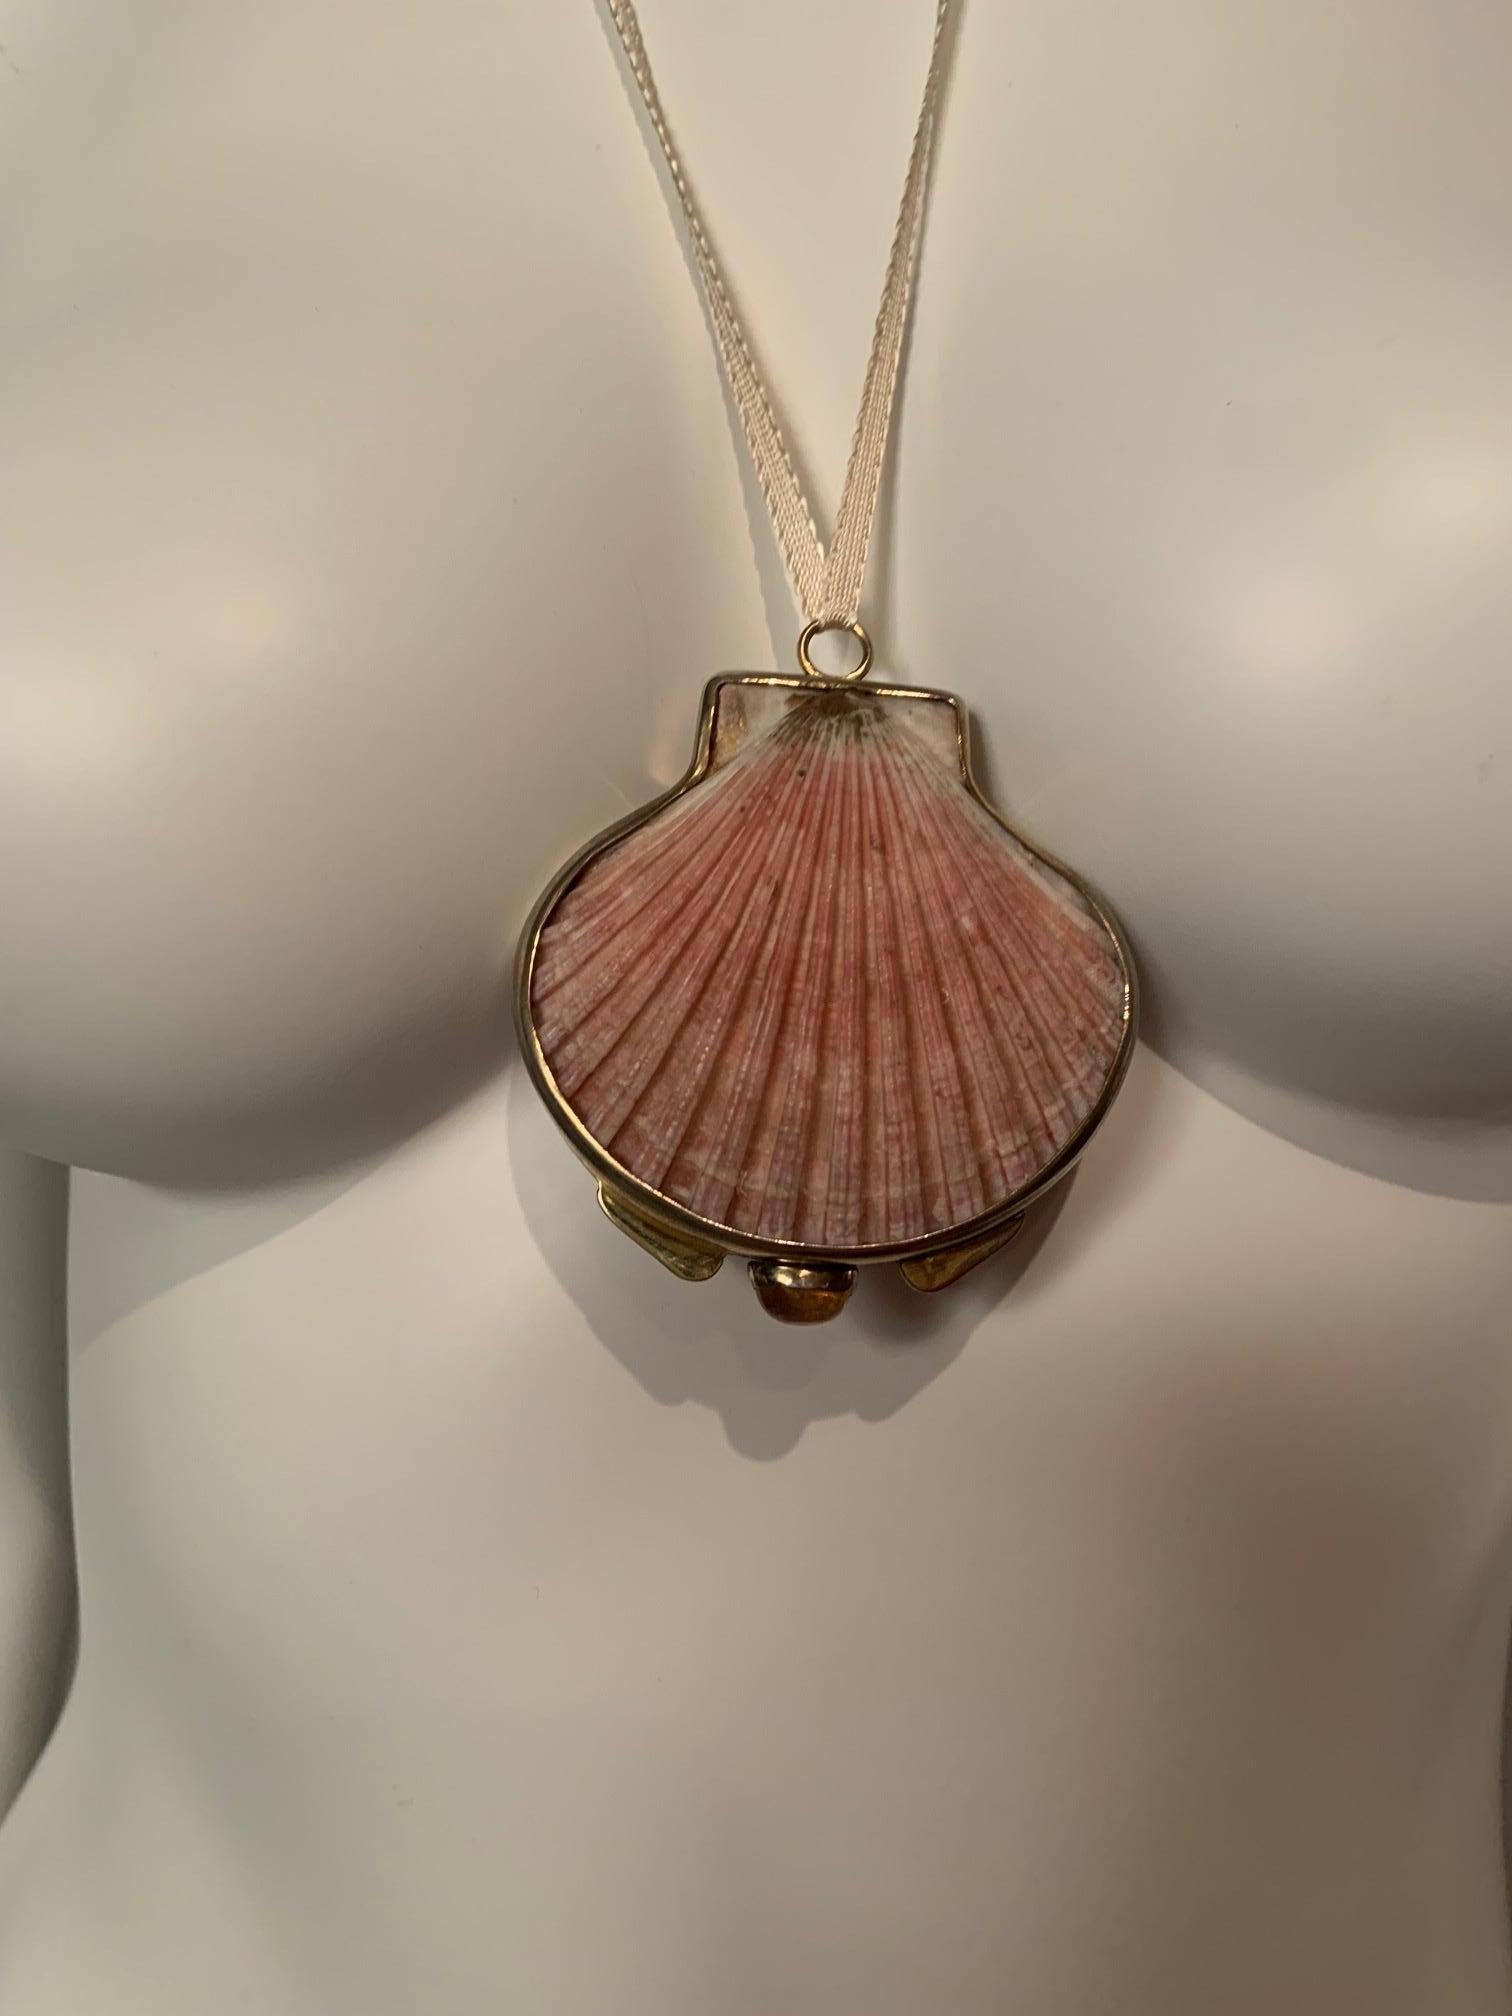 This beautiful shell pendant or compact designed by Marguerite Stix in the late 1960's is framed with gilt silver and it has a cabochon orange opal clasp.  The back of the shell is flat so it is comfortable to wear and easy to display.  It is marked